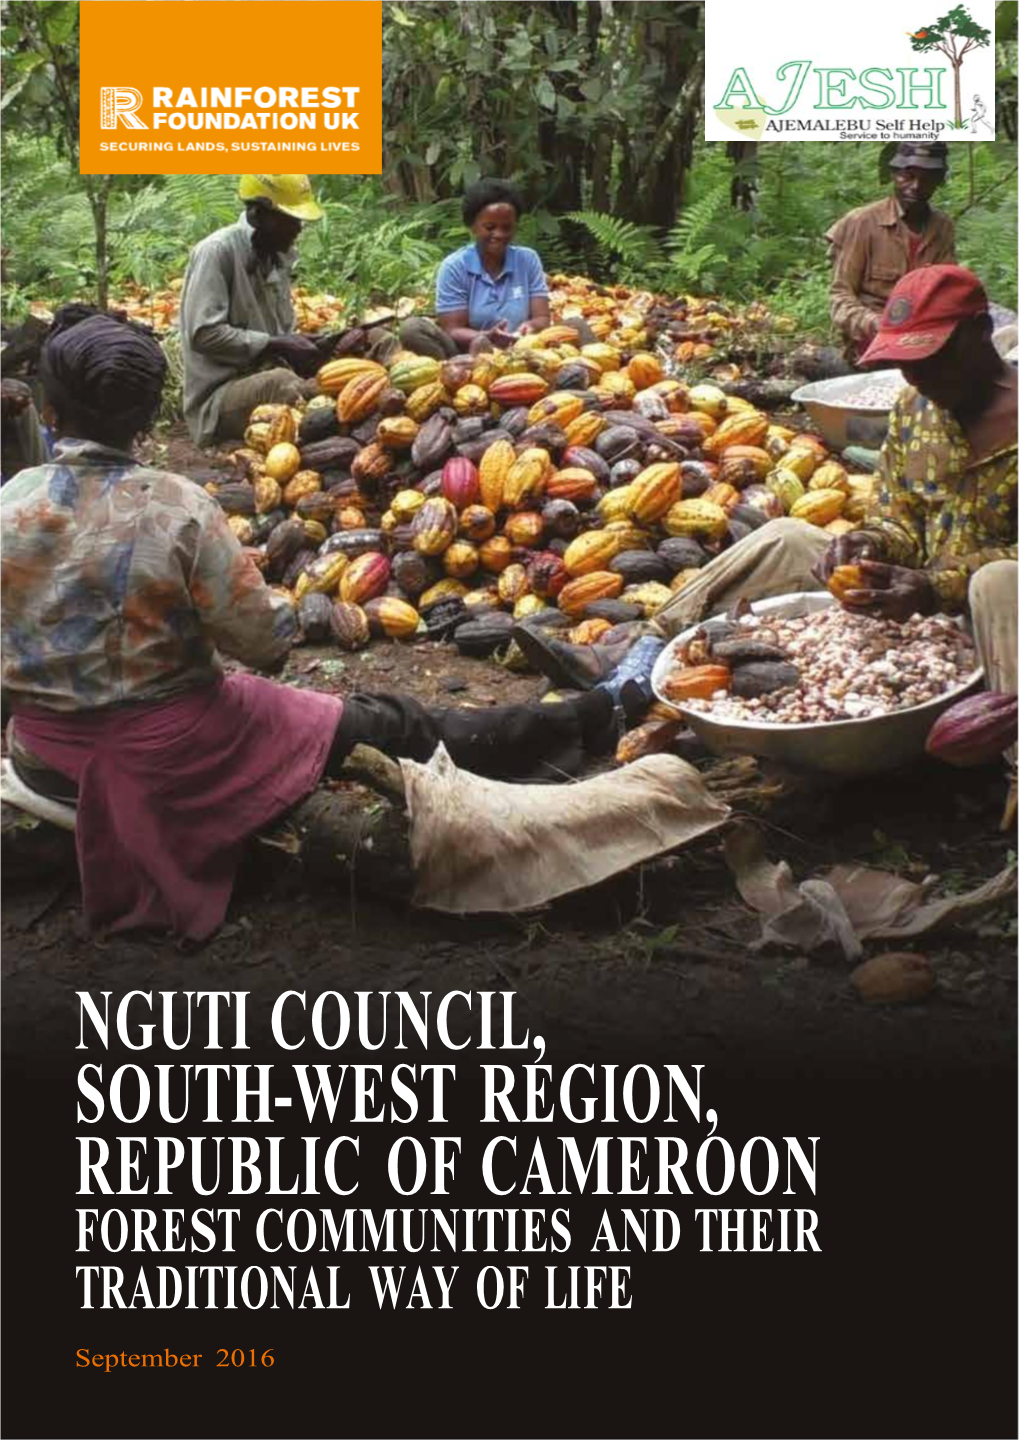 Nguti Council, South-West Region, Republic of Cameroon Forest Communities and Their Traditional Way of Life